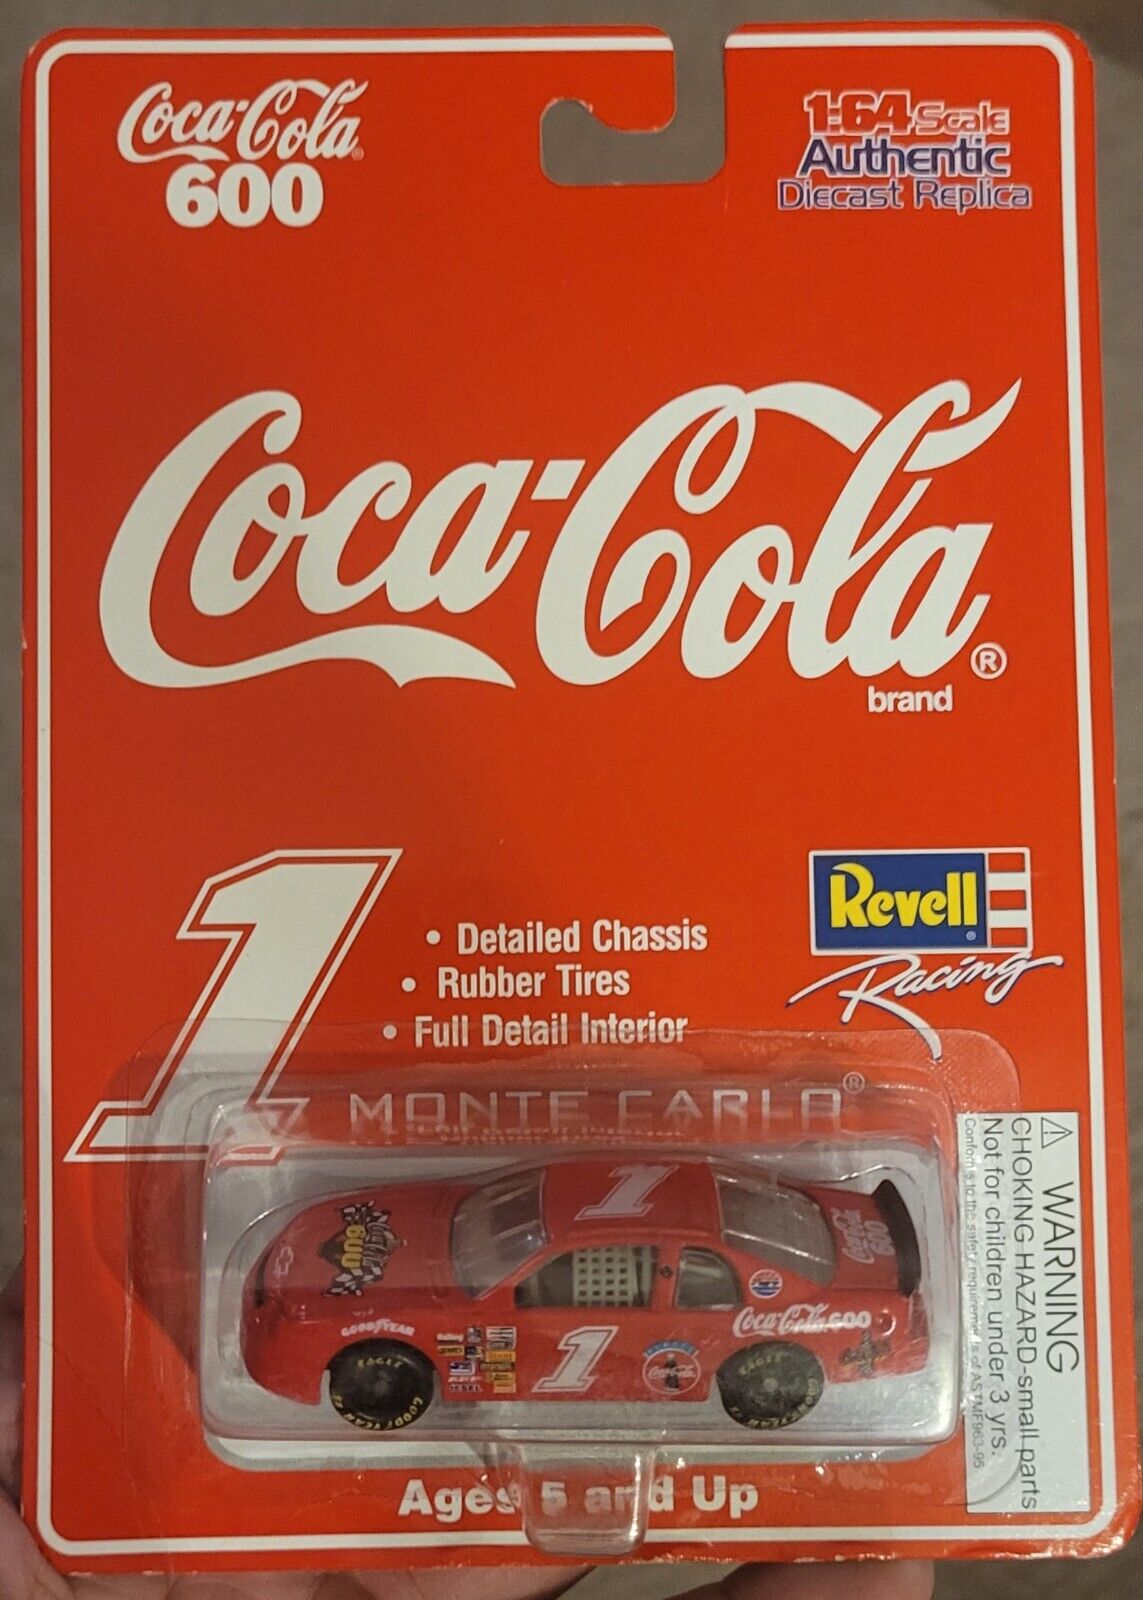 Vintage 1997 Revell Racing Coca-Cola 600 Red #1 Car 1:64 Scale New In Box